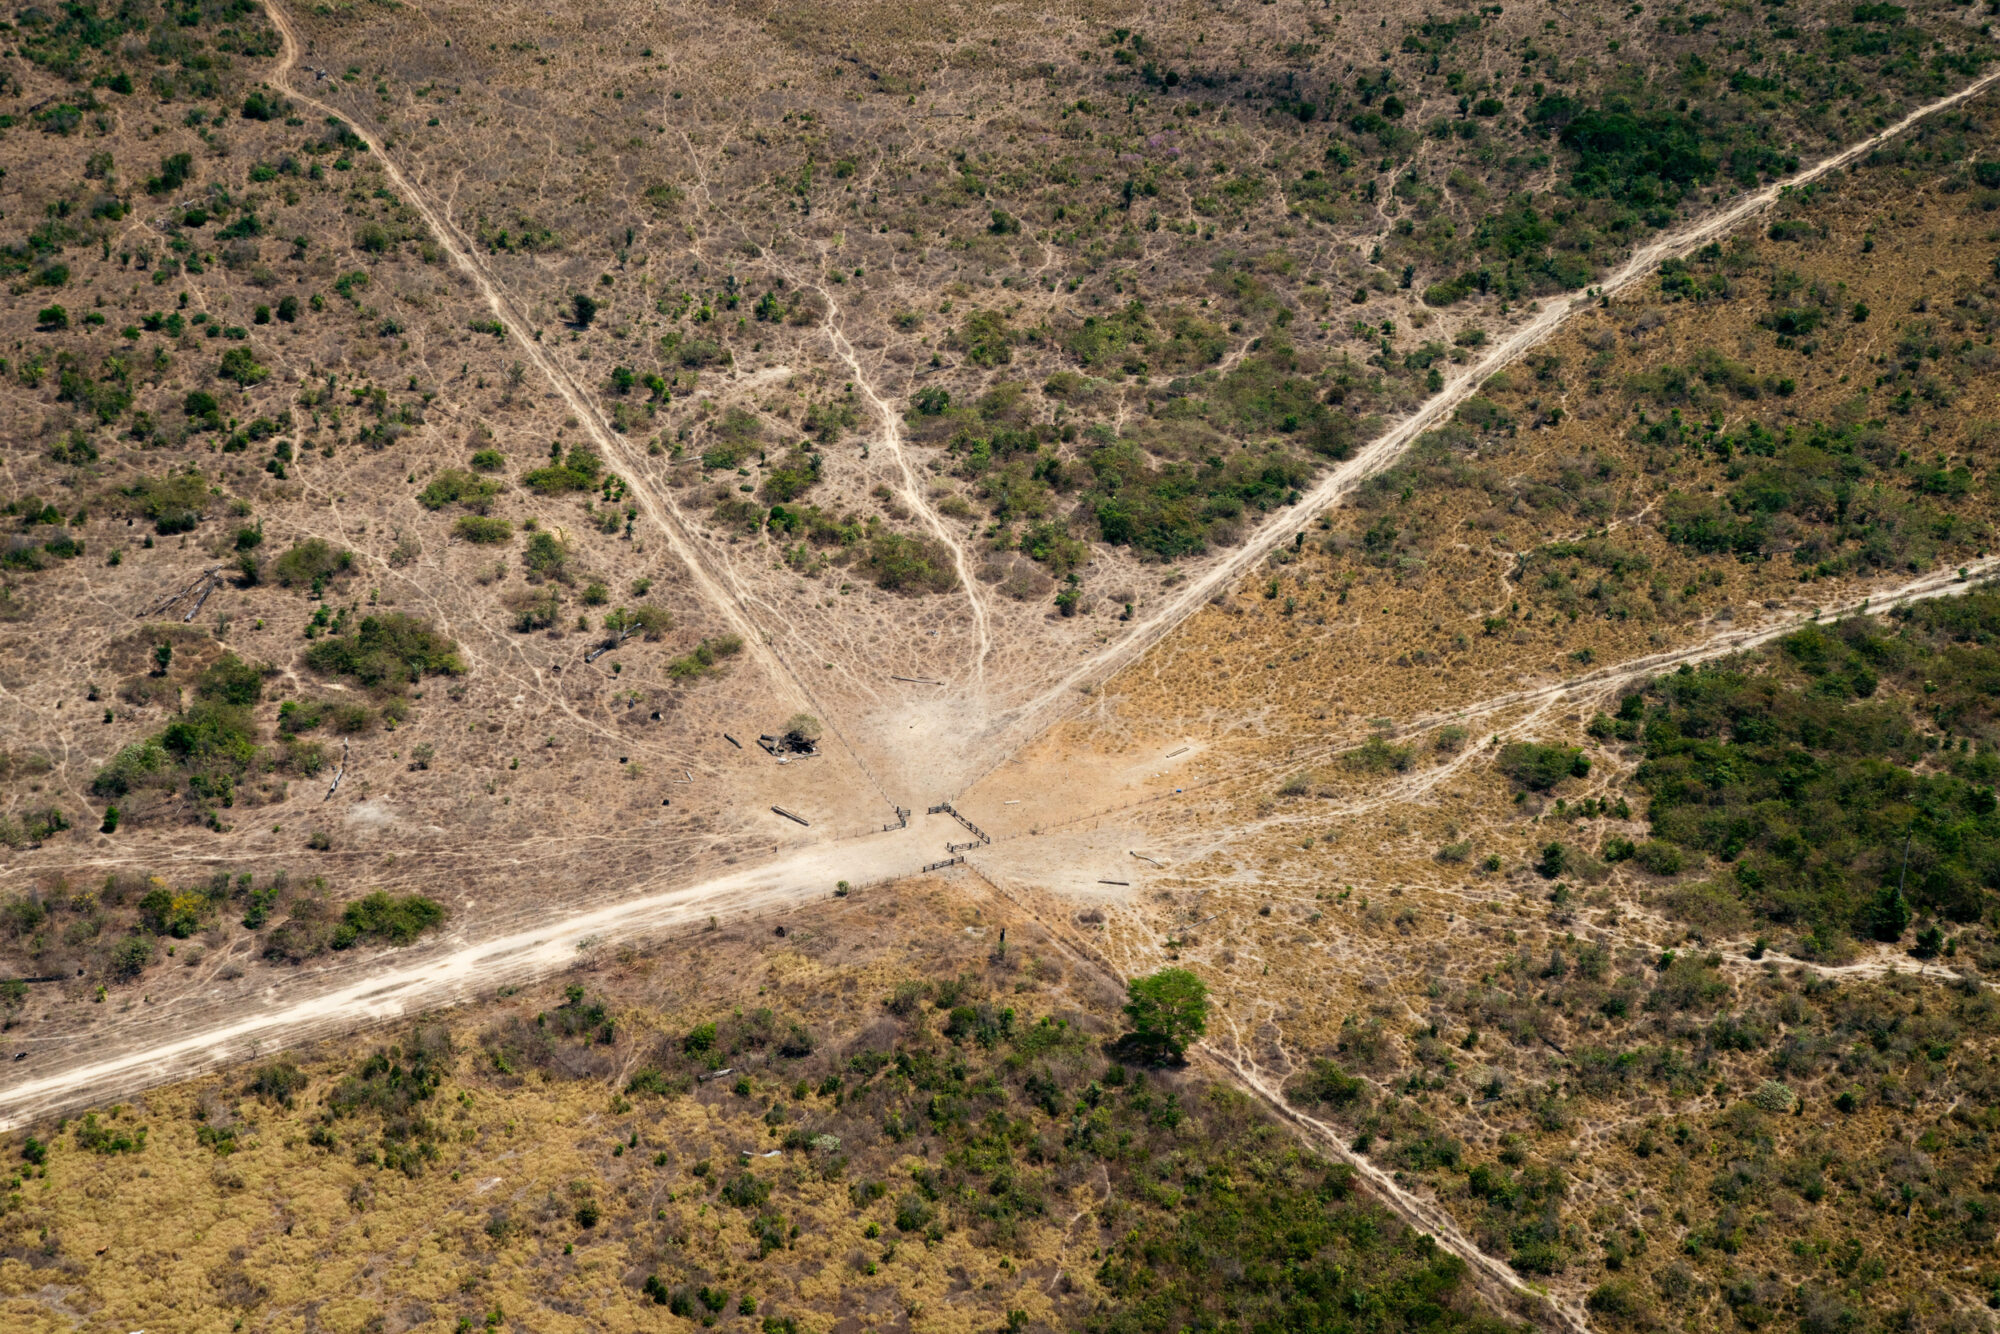 Aerial view of roads and pathways running through a dry, scrubby landscape. Coming from all directions, they converge in the middle of the frame.